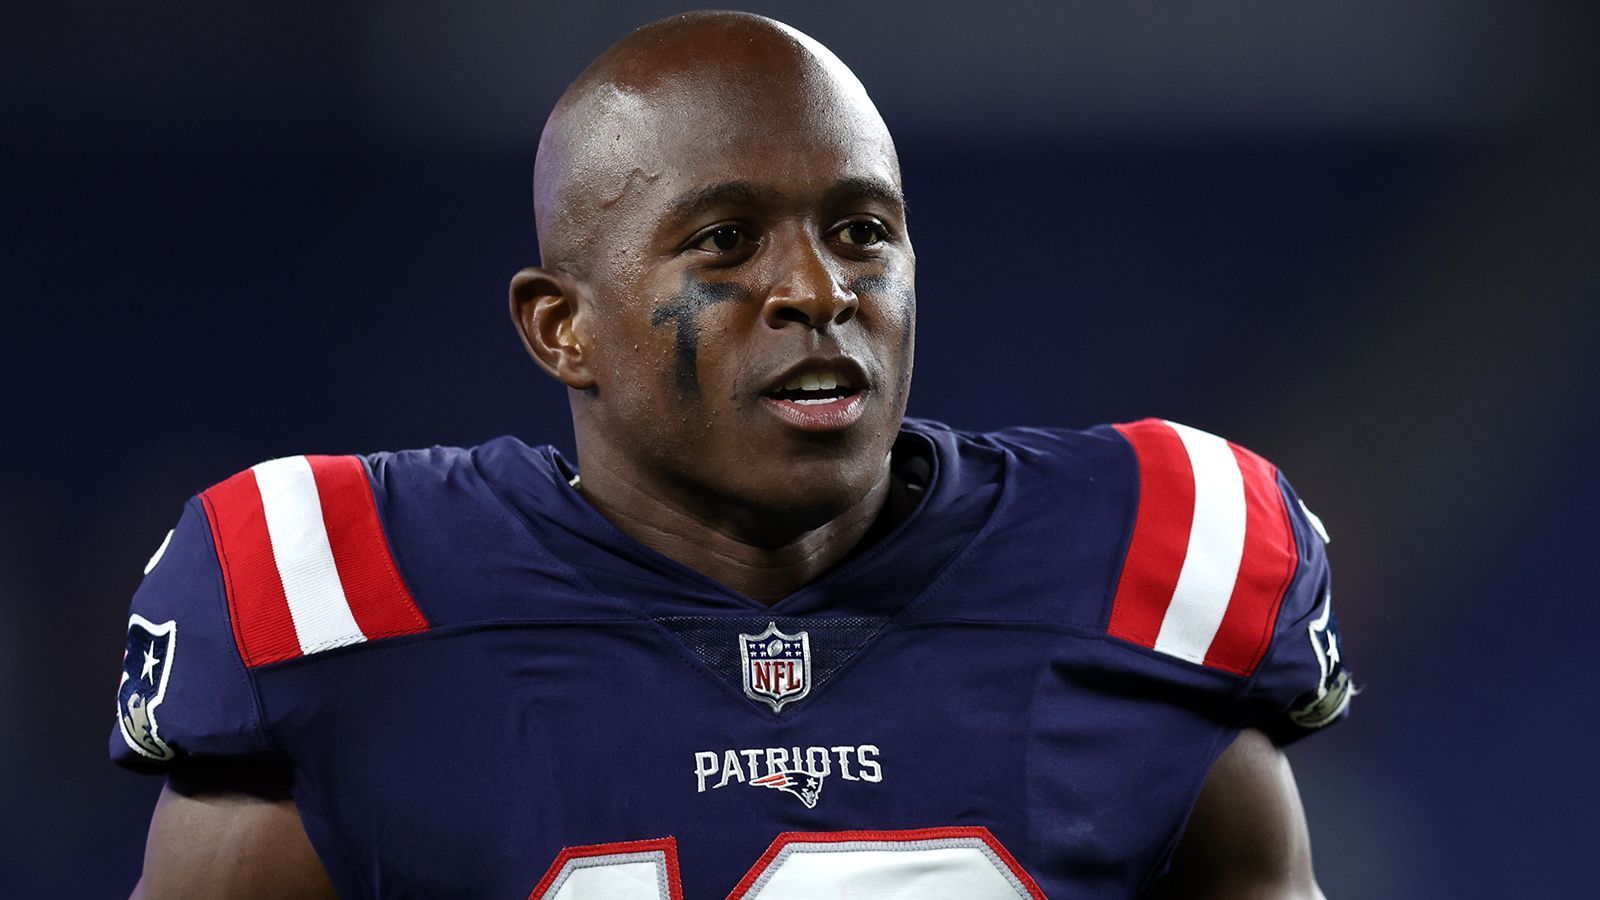 
                <strong>Special Teamer: Matthew Slater</strong><br>
                &#x2022; Aktuelle Franchise: New England Partriots<br>&#x2022; In der NFL seit: 2008<br>
              